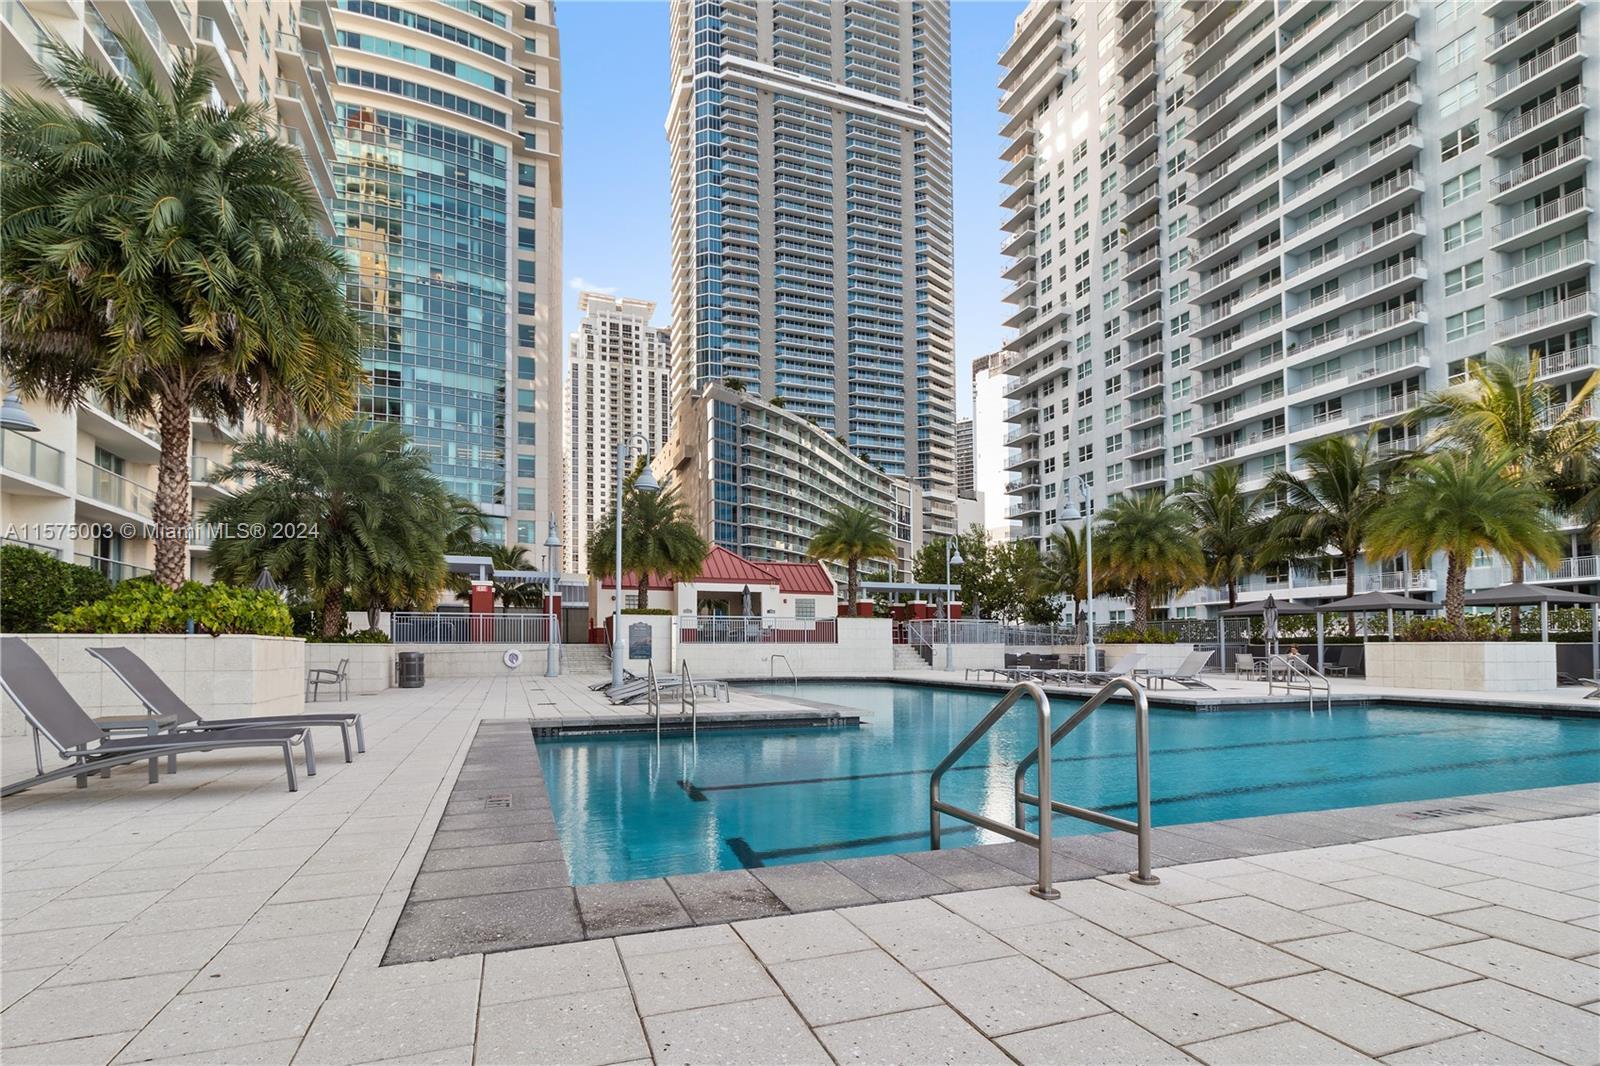 Welcome to the Mark on Brickell with stunning panoramic views of Biscayne Bay and the city skyline l